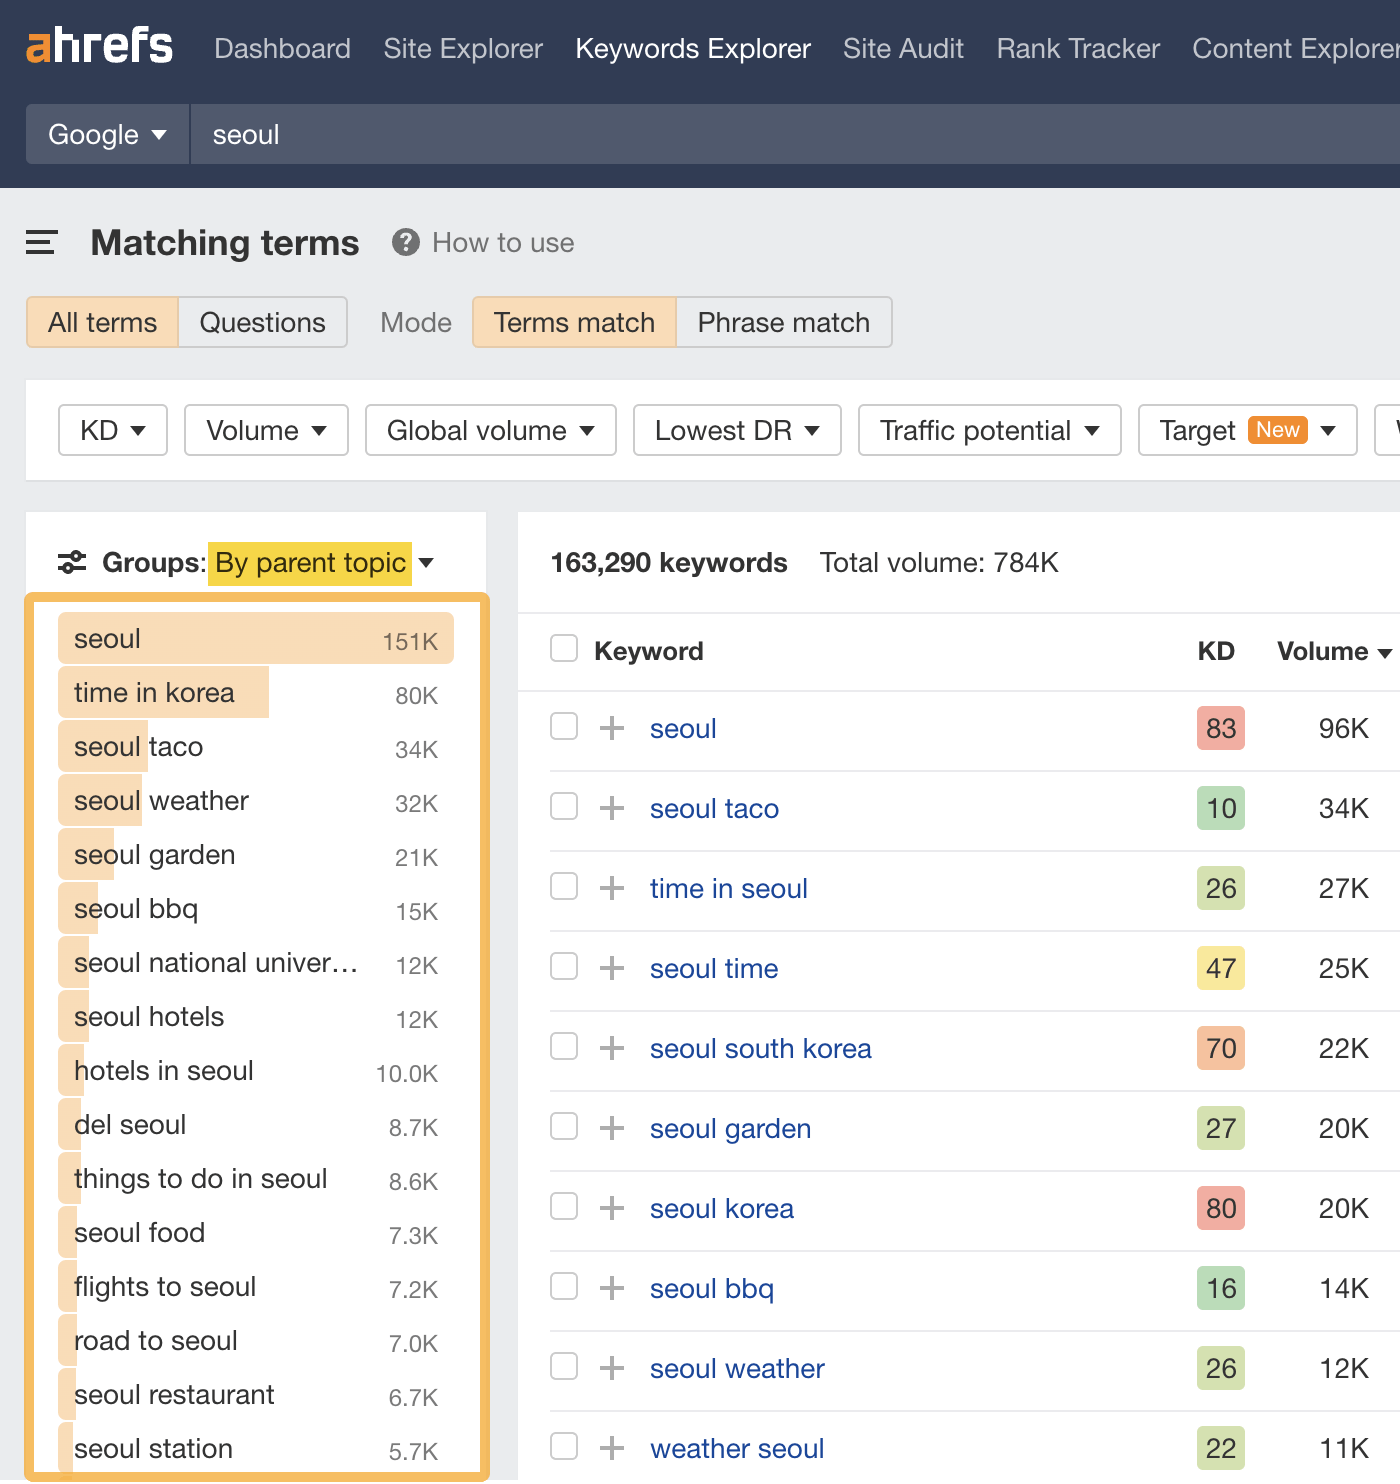 Keywords in Matching terms report grouped by Parent Topic, via Ahrefs' Keywords Explorer
